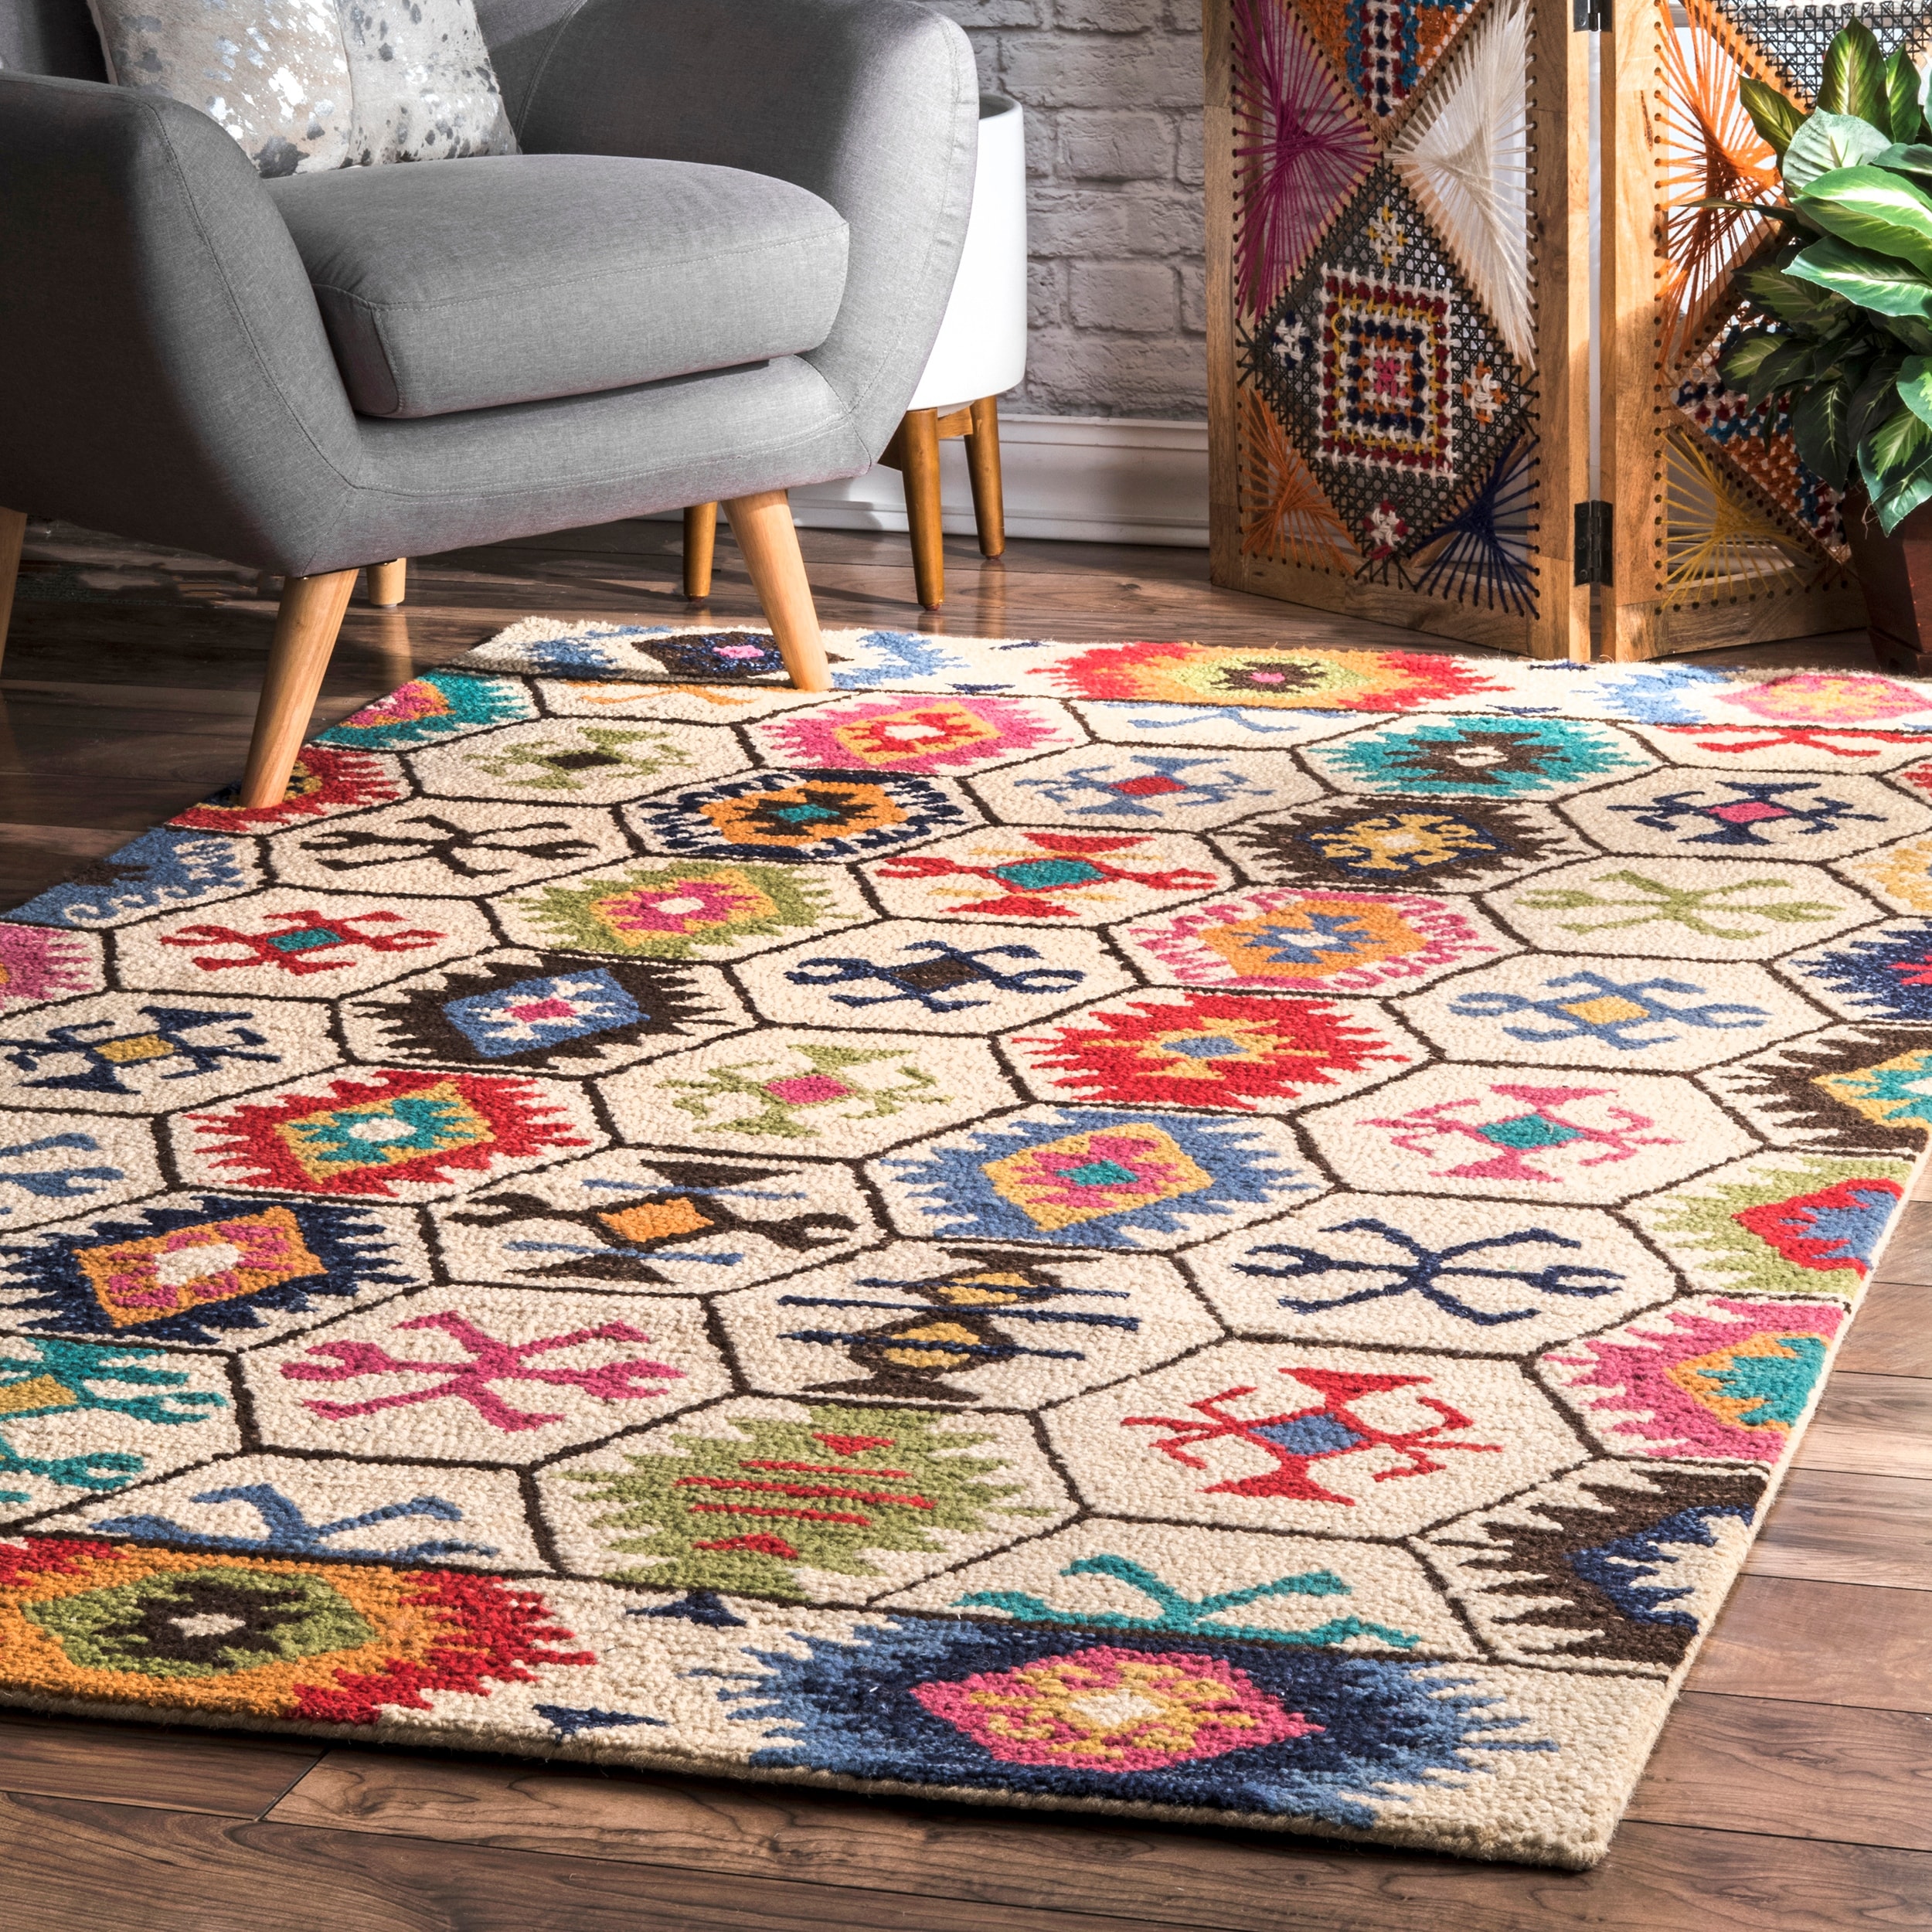 https://ak1.ostkcdn.com/images/products/is/images/direct/eefe718eae357f19d1c94e45ba2958678fcf0659/nuLOOM-Handmade-Southwestern-Abstract-Honeycomb-Area-Rug.jpg